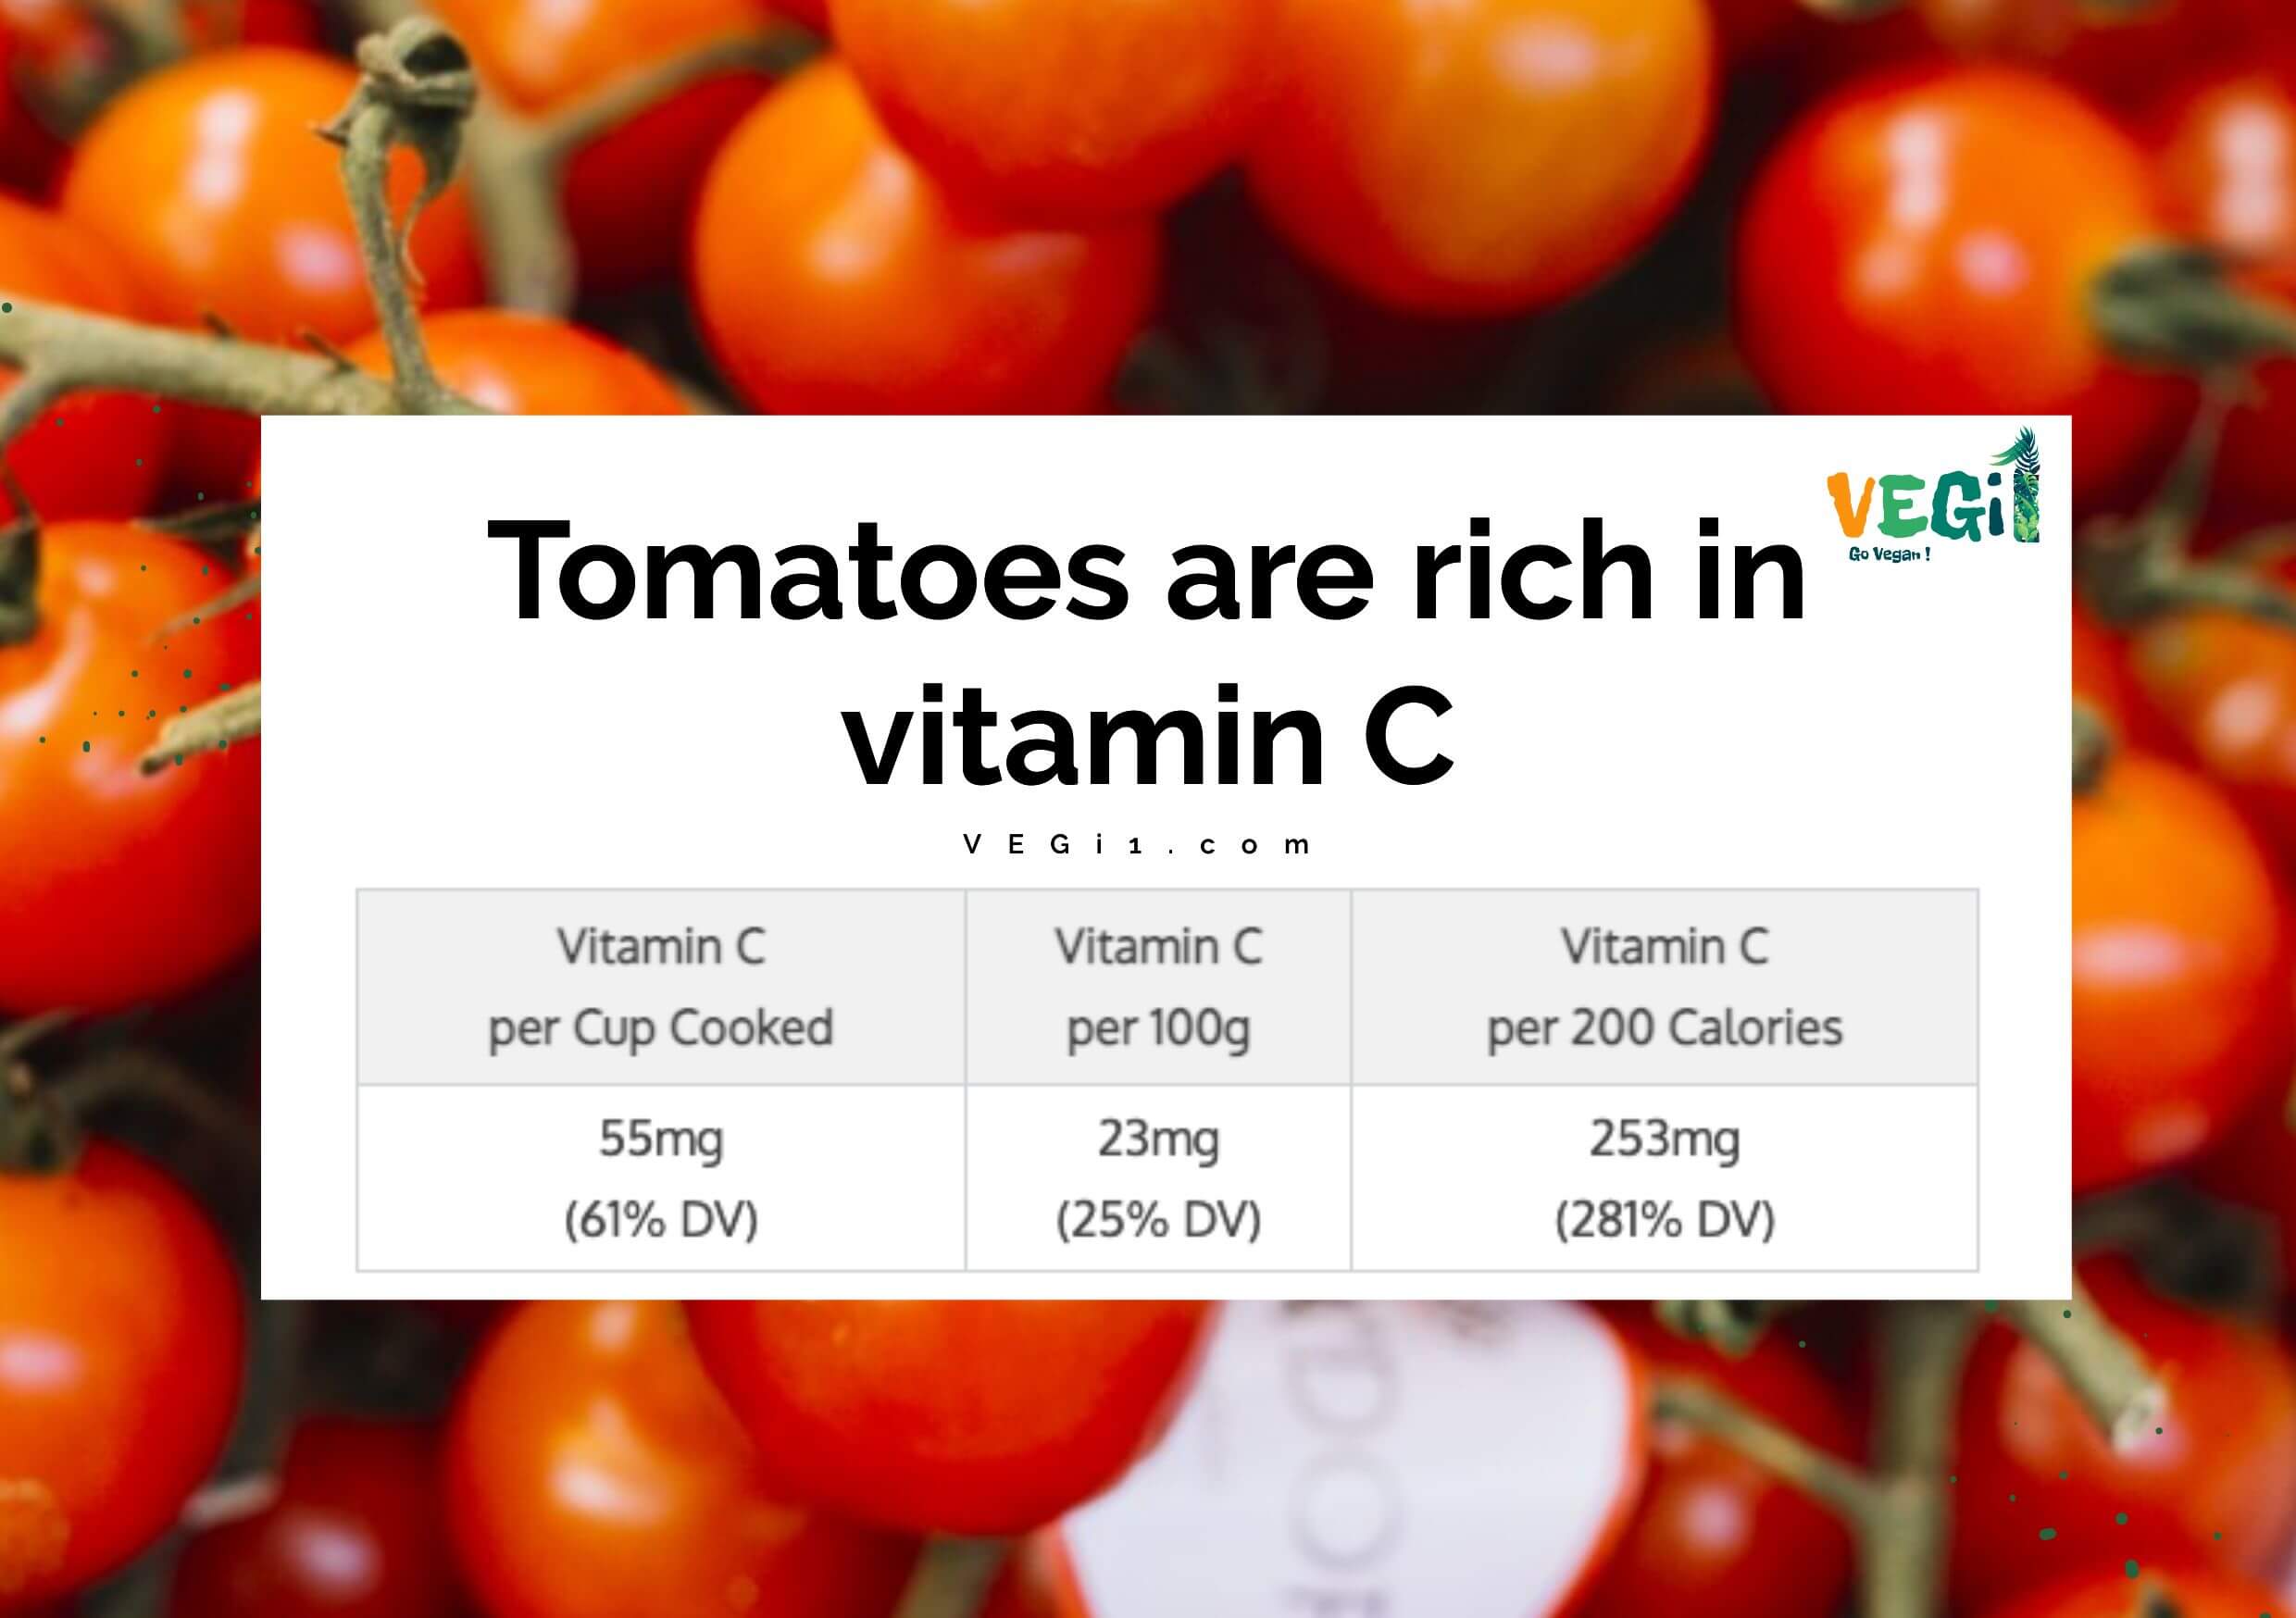 Tomatoes are rich in vitamin C